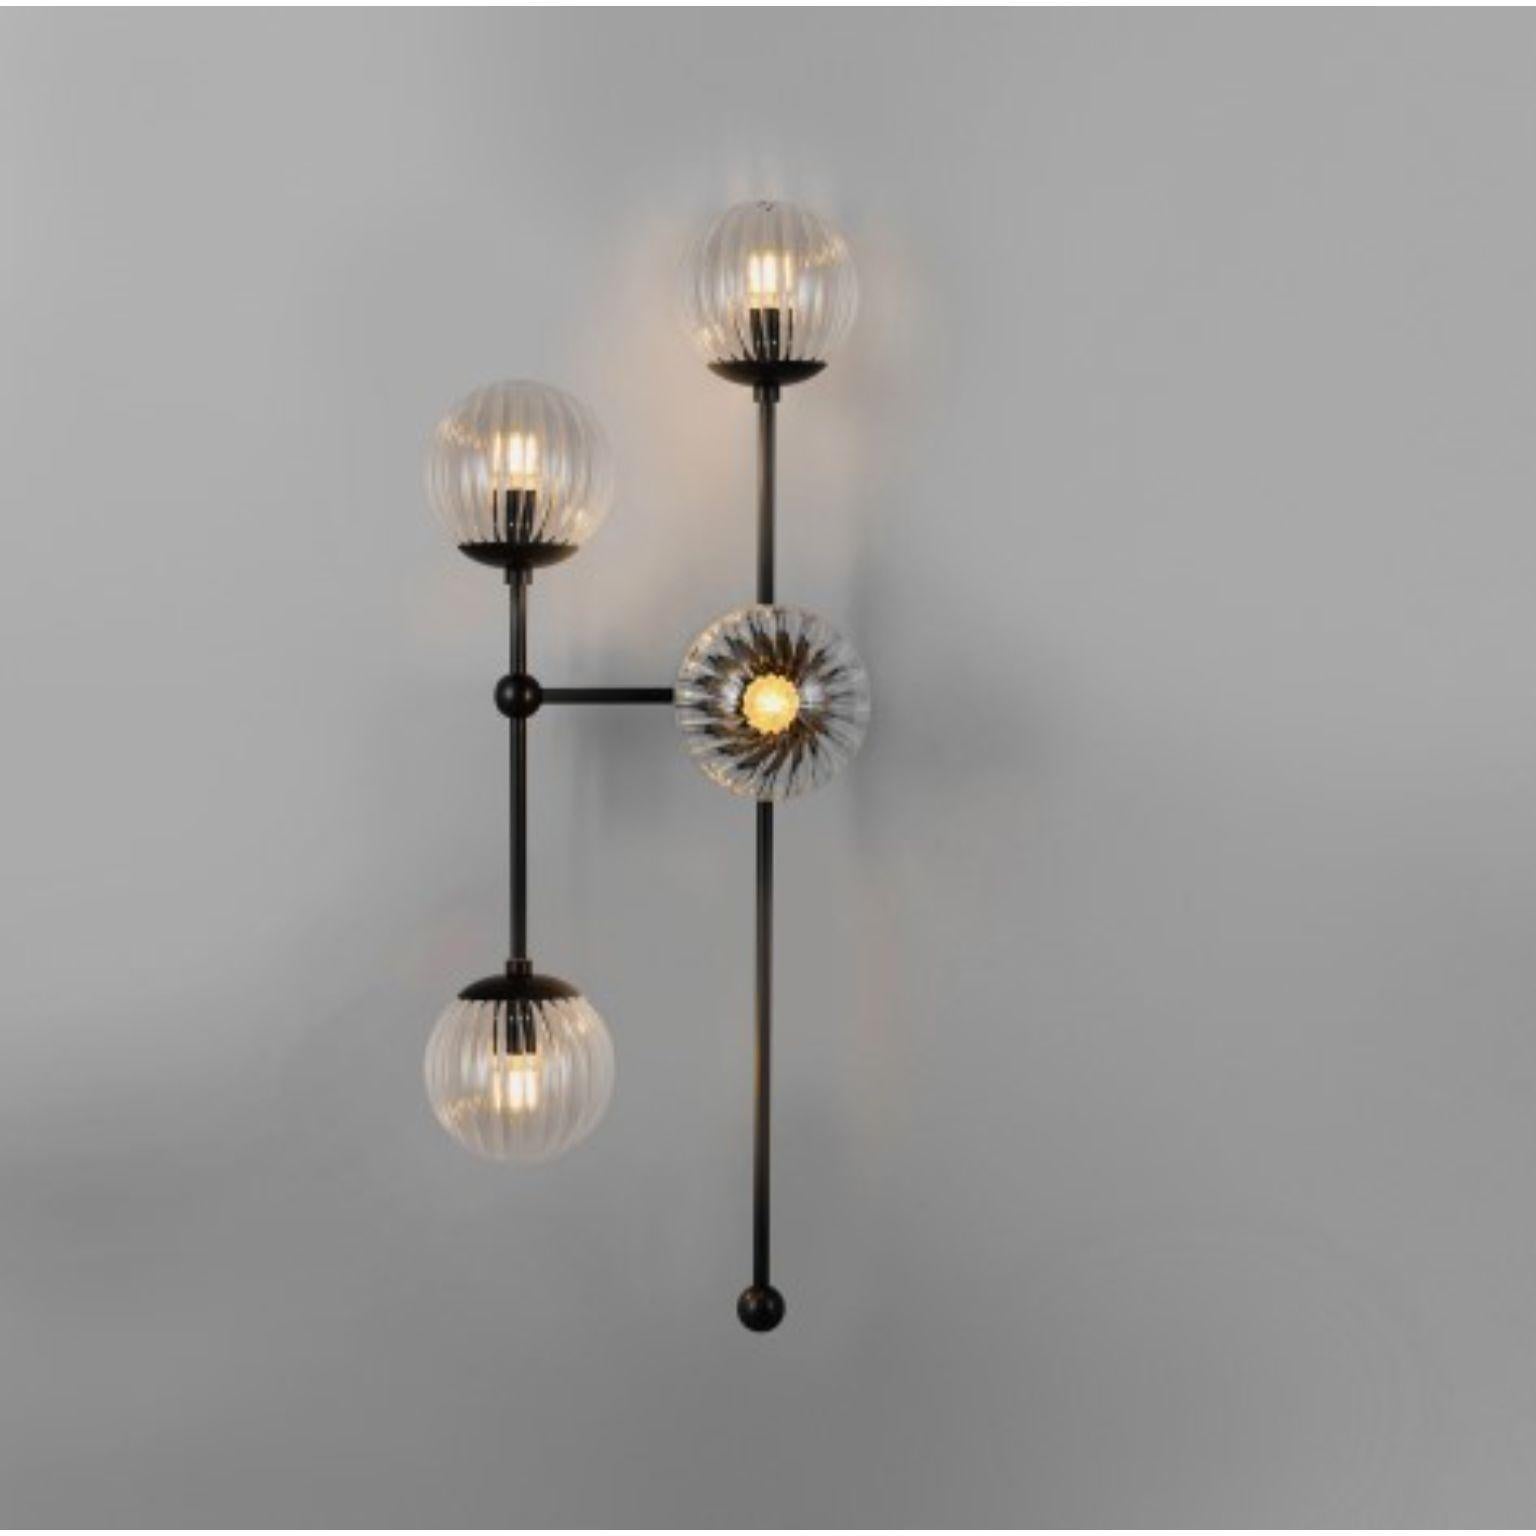 Armstrong 4 L wall sconce by Schwung
Dimensions: W 35.2 x D 33.1 x H 92.2 cm
Materials: Brass, Opal glass
Weight: 9 kg

Finishes available: Black gunmetal, polished nickel, brass
Other sizes available.

 Schwung is a german word, and loosely